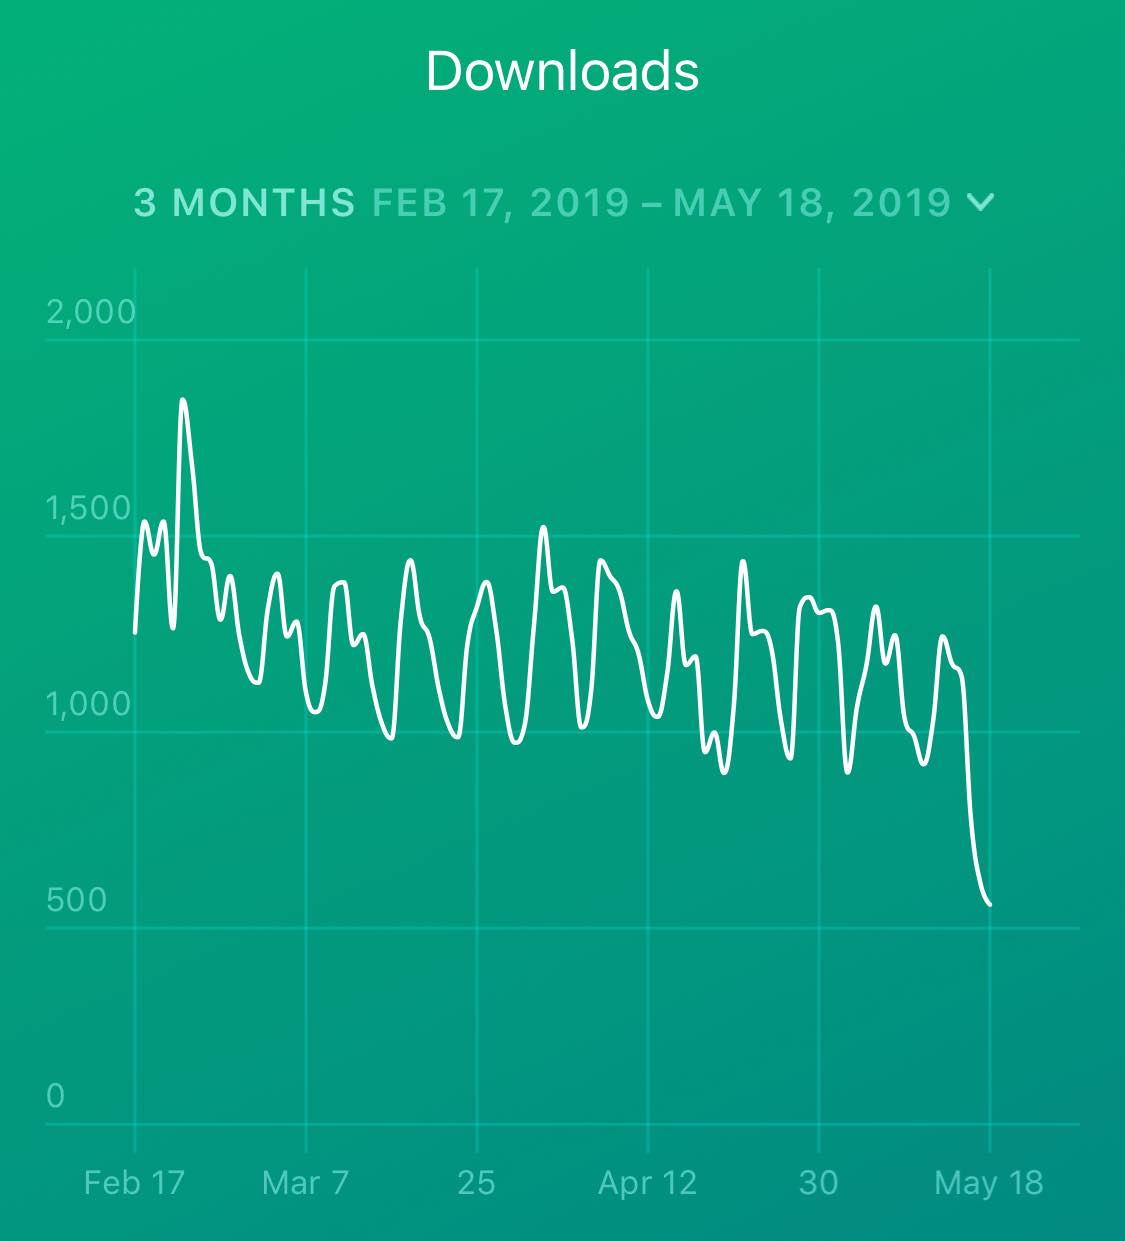 App downloads mysteriously plummeted on May 18th.